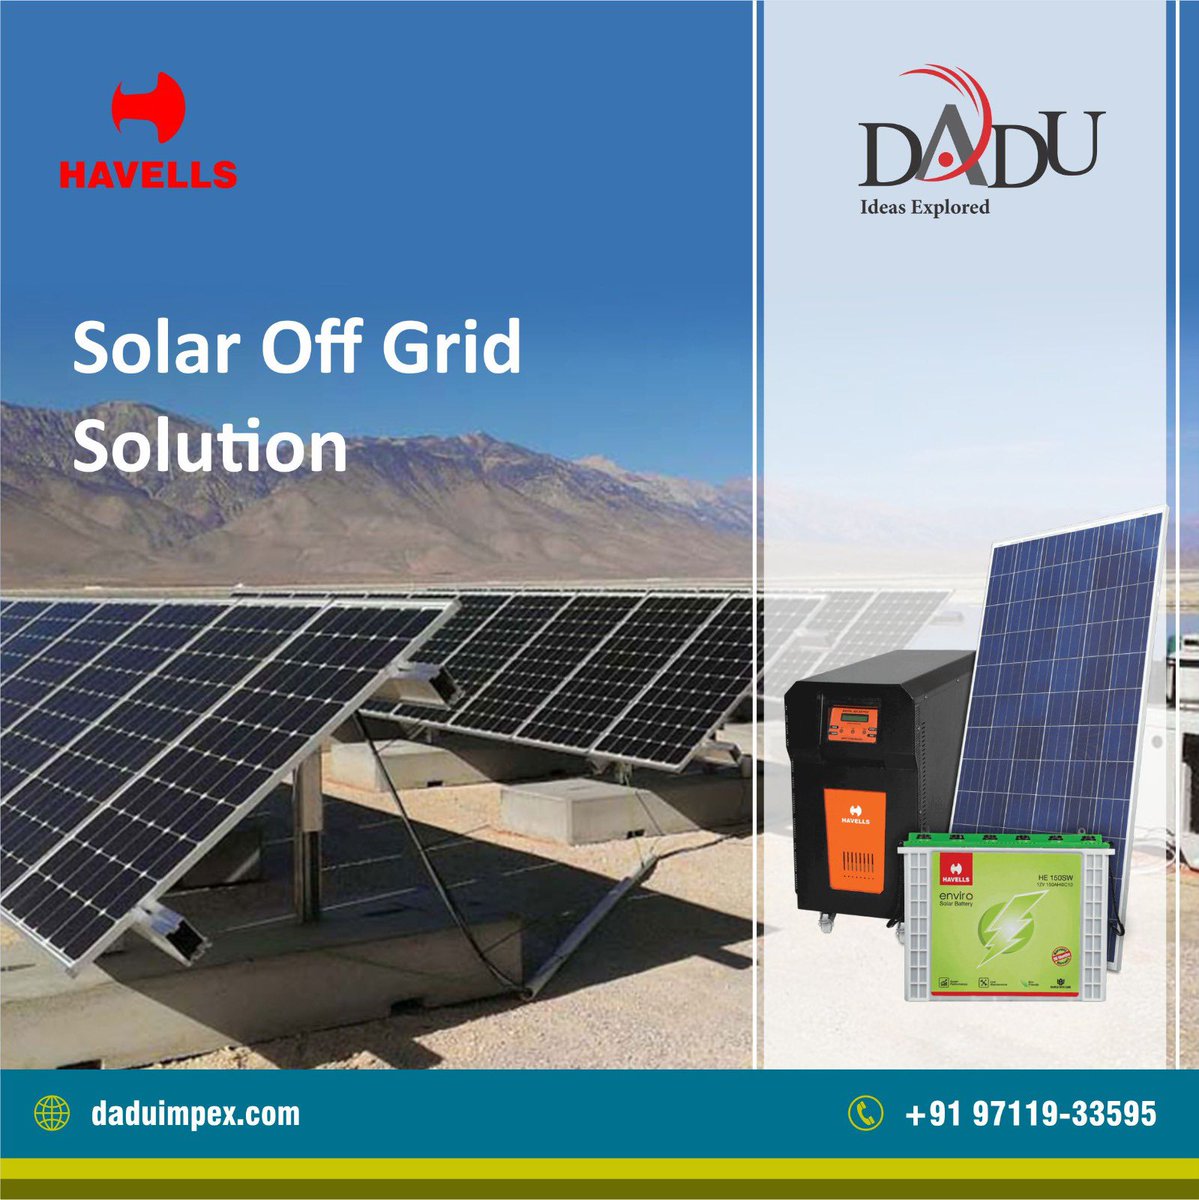 Havells 𝗦𝗢𝗟𝗔𝗥 𝗢𝗙𝗙 𝗚𝗥𝗜𝗗 𝗦𝗢𝗟𝗨𝗧𝗜𝗢𝗡𝗦
With #Havells end to end customized power back solution power your loads in case of power cuts
#Solar #SolarProducts #greenenergy #solarnews #solarscoop #solarenergy #solarplants #india #renewableenergy #solarpower #solarpower